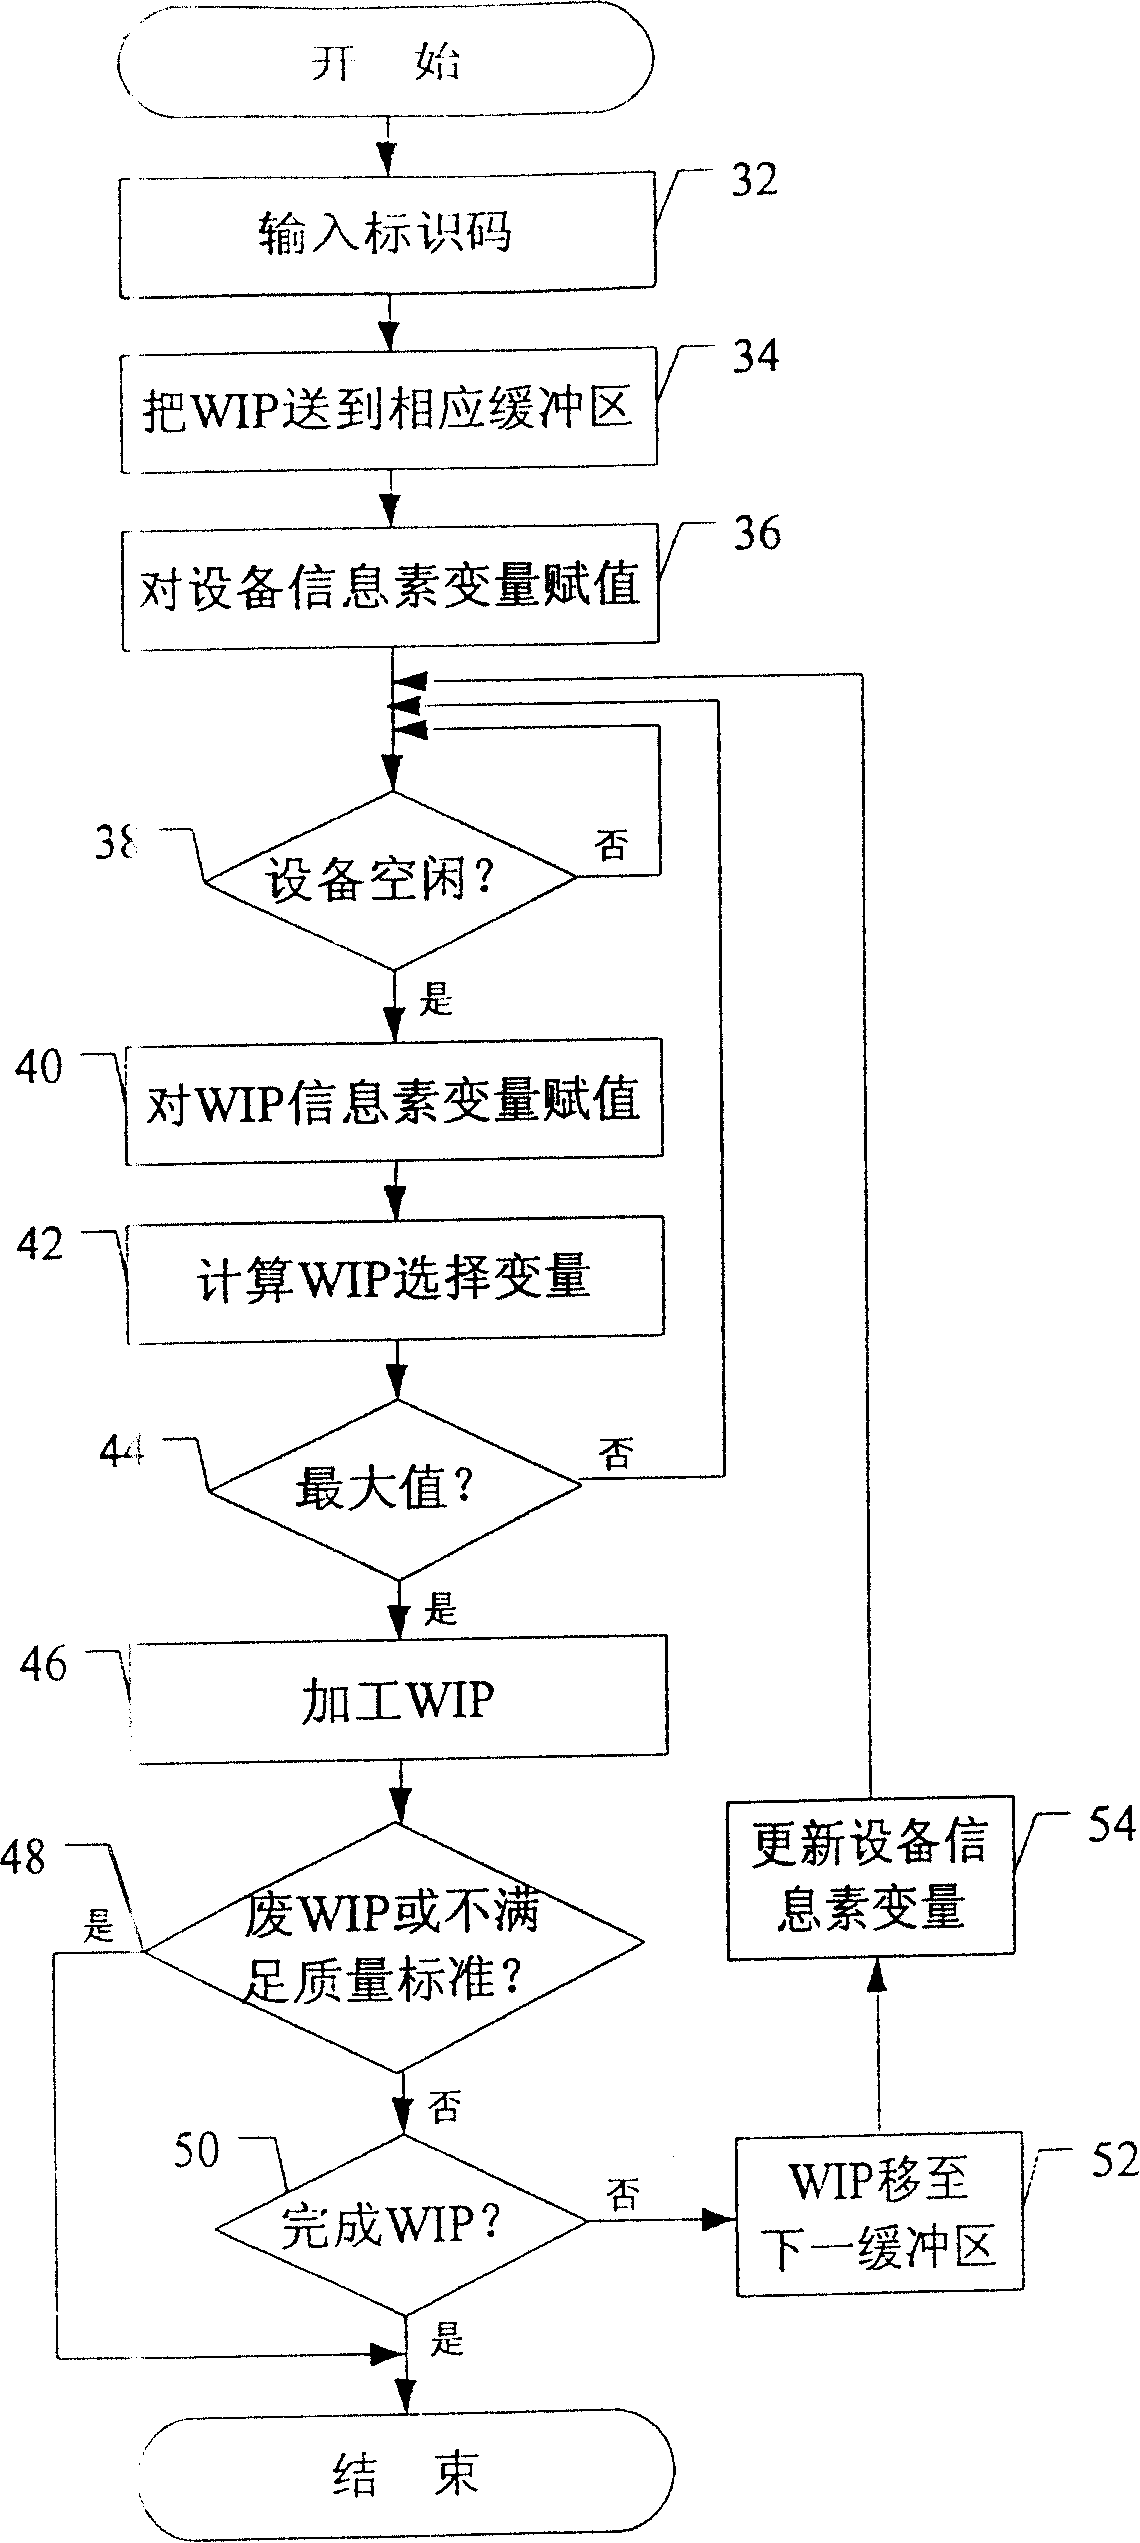 Dynamic scheduling method based on pheromone for semiconductor production line